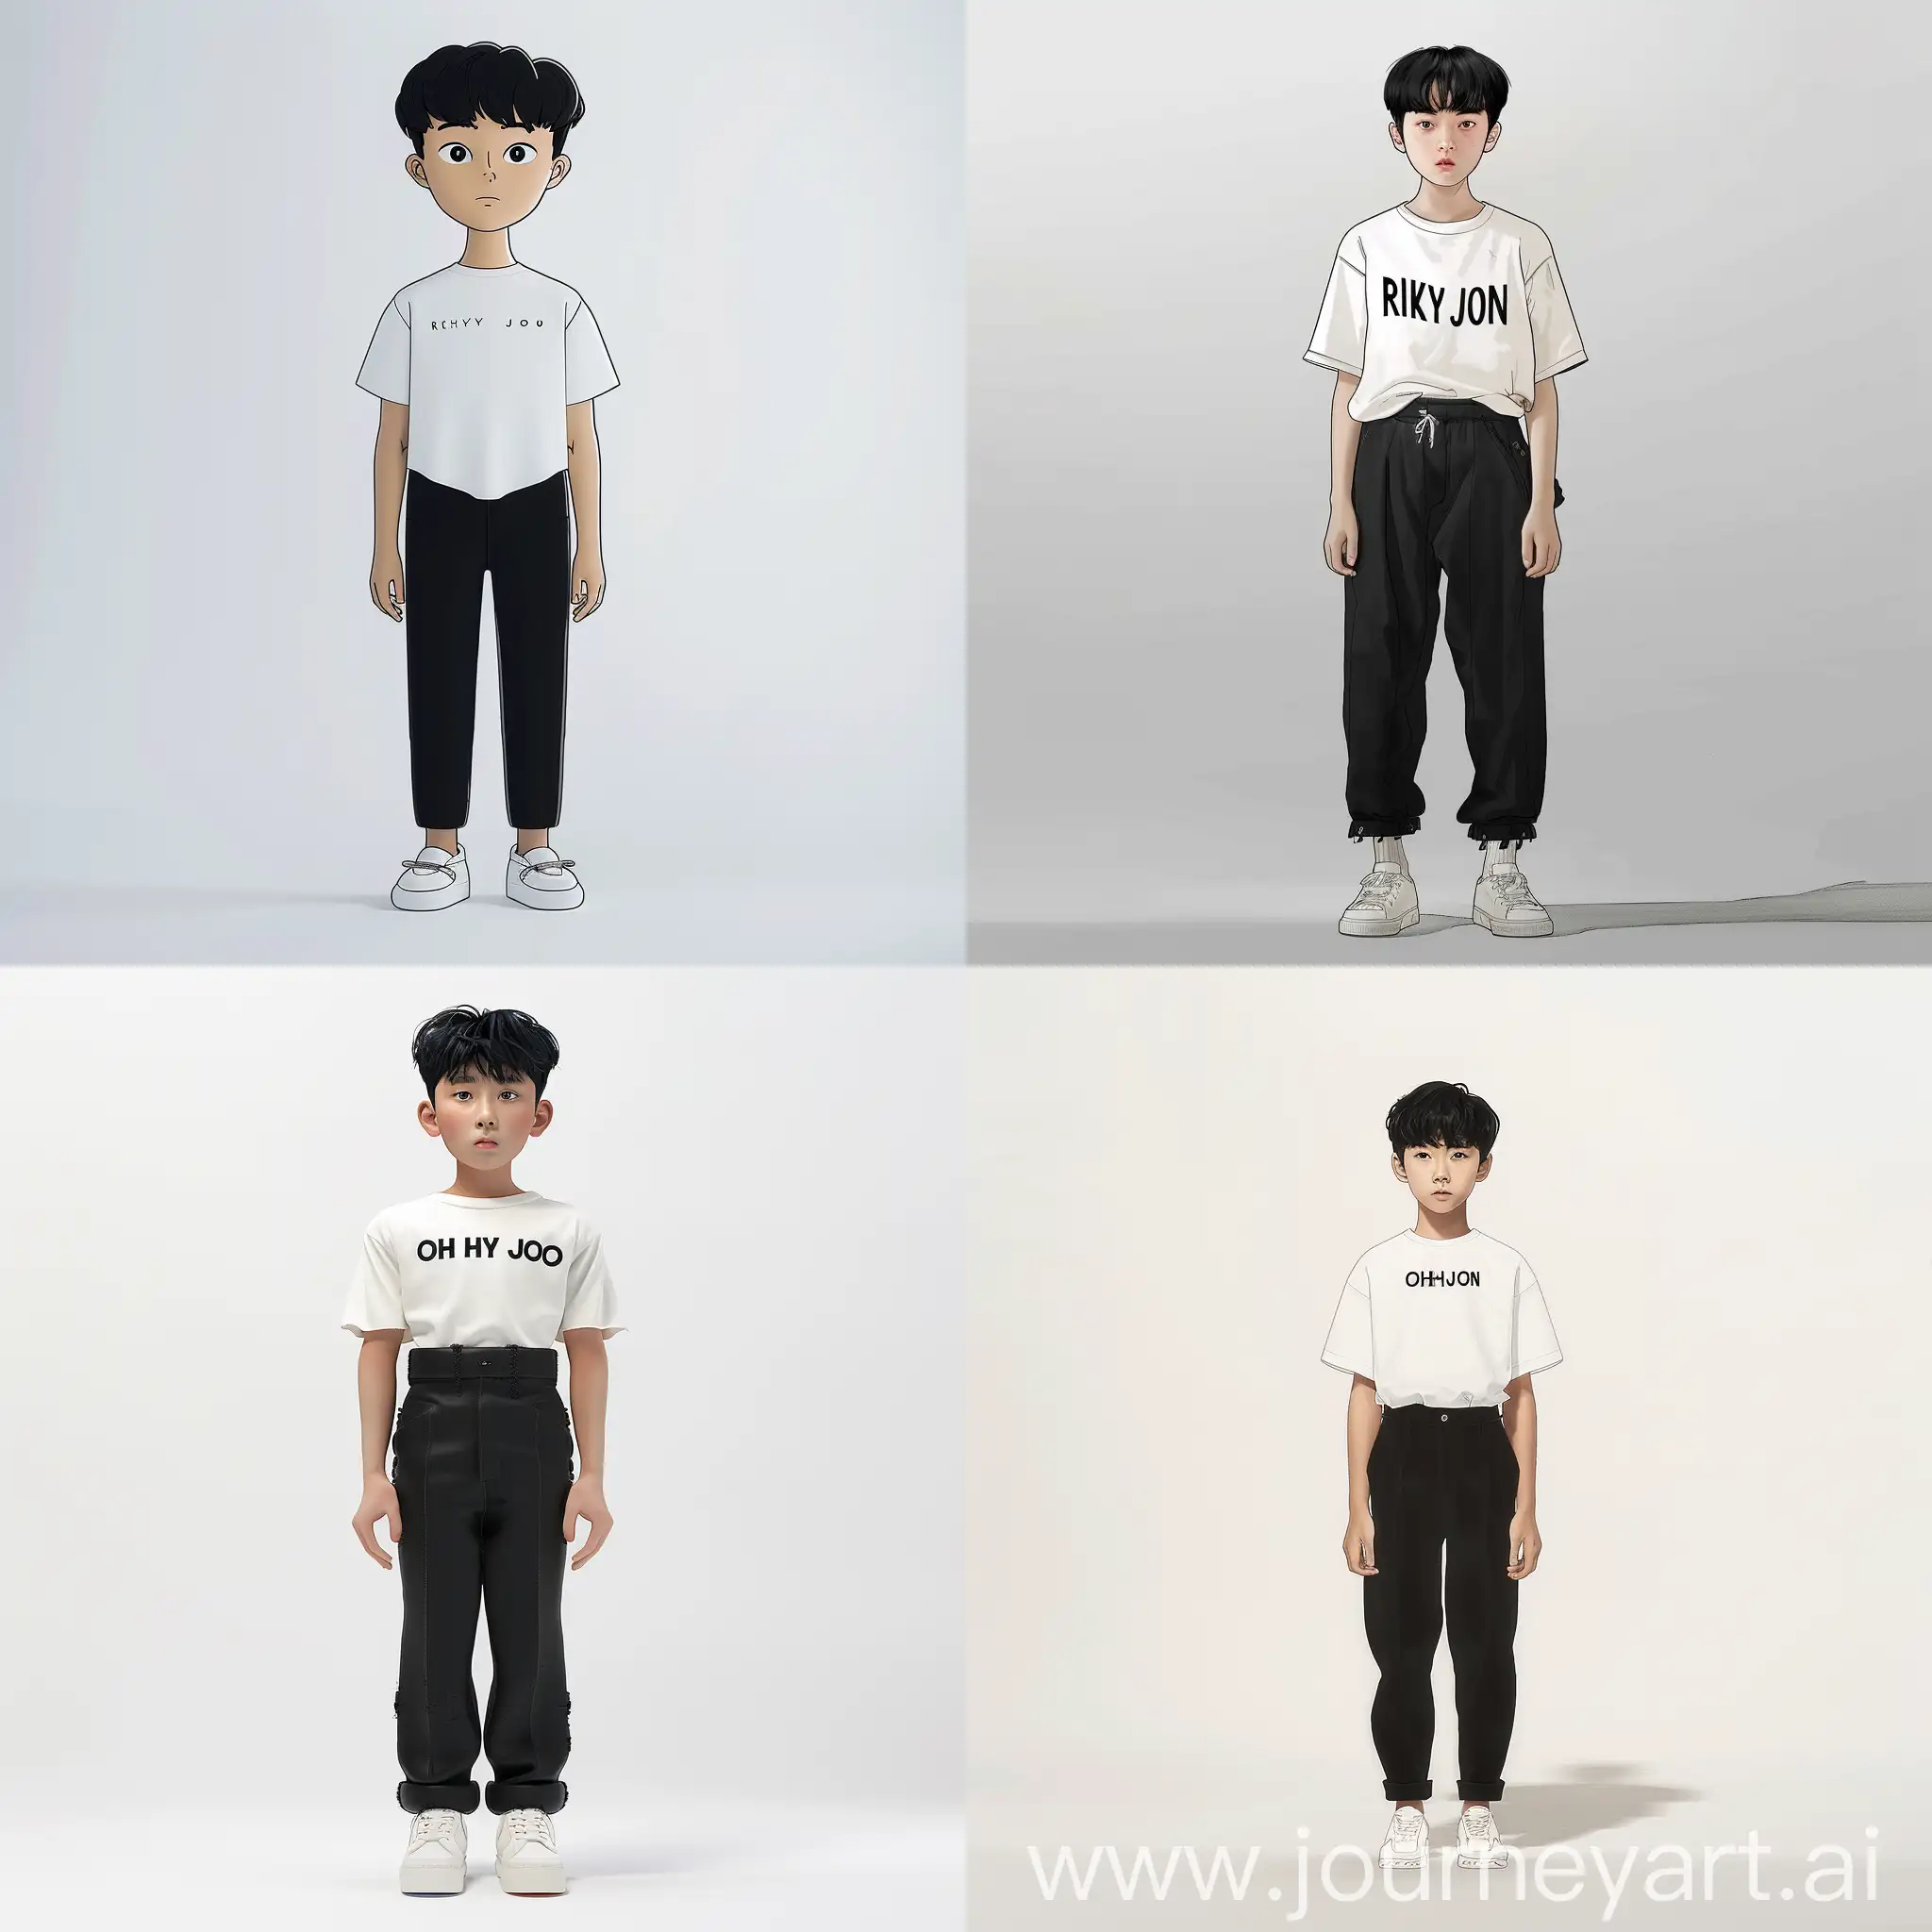 Korean-Teen-Boy-Oh-Hyunjoon-in-Casual-White-Tshirt-and-Black-Pants-with-Sneakers